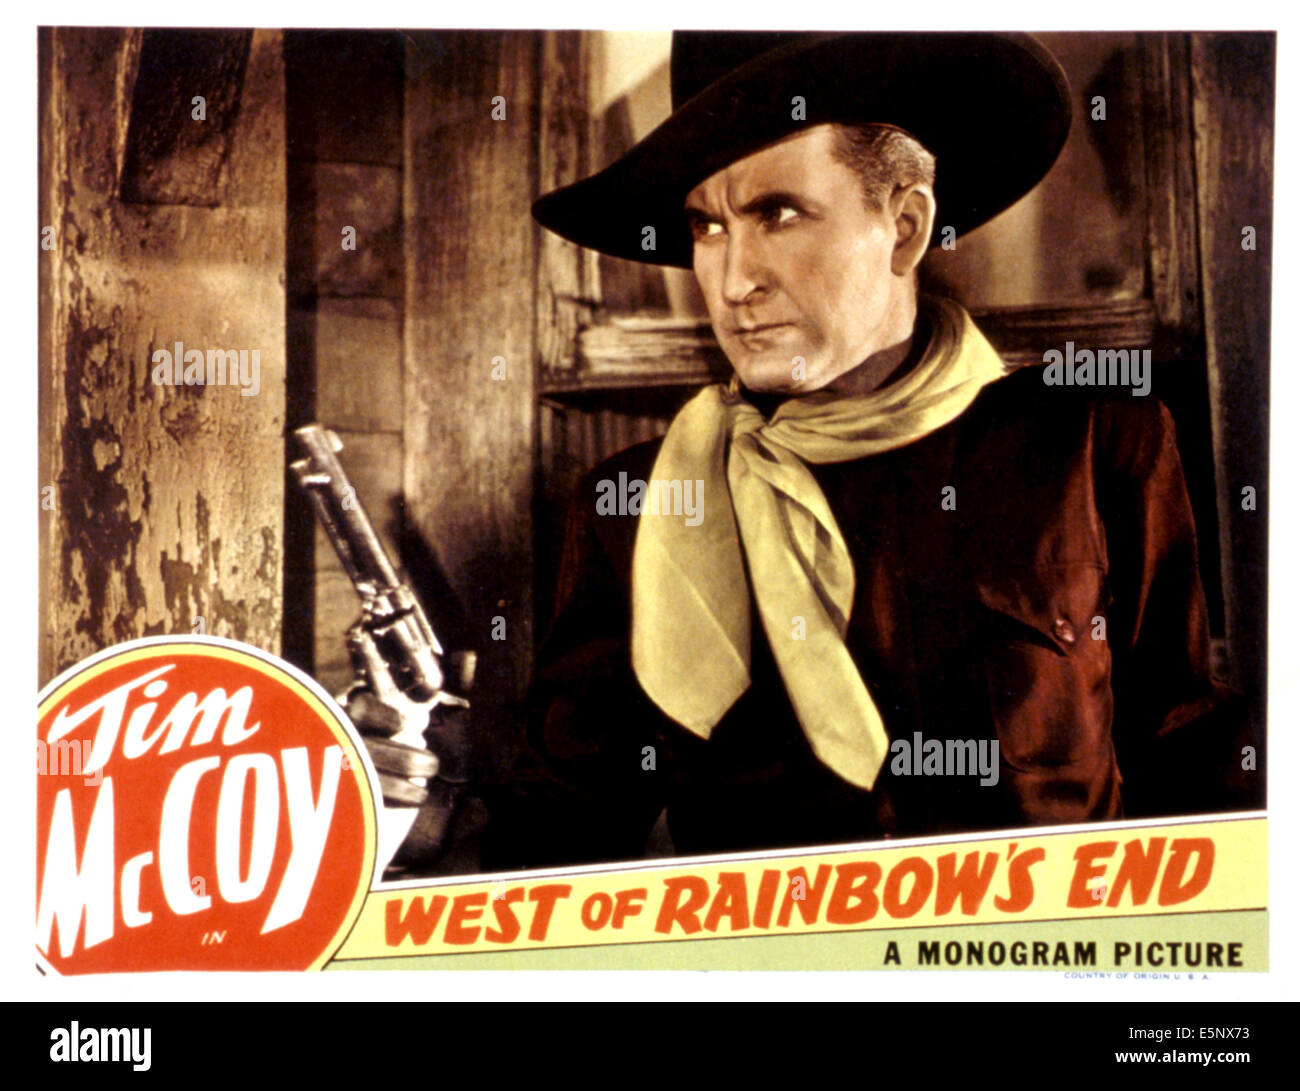 A ovest di RAINBOW'S END, Tim McCoy, 1938 Foto Stock